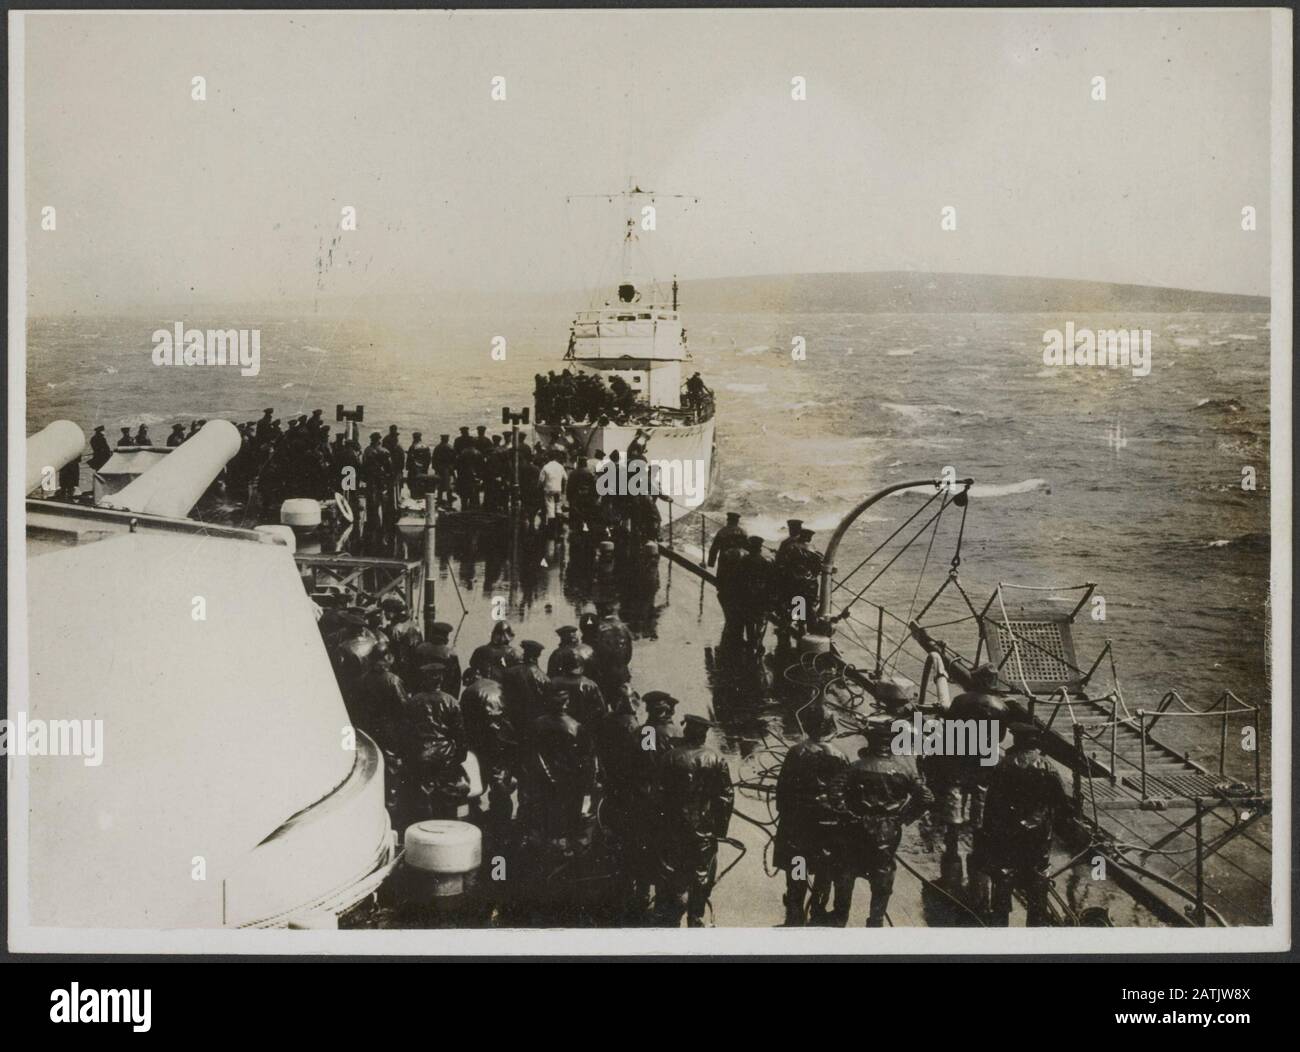 With the British navy in war time Description: Battleship taking a destroyer in tow Annotation: The British Navy in wartime. Battleship that torbedopbootjager in tow takes Date: {1914-1918} Keywords: WWI, navy, sailors, warships Stock Photo